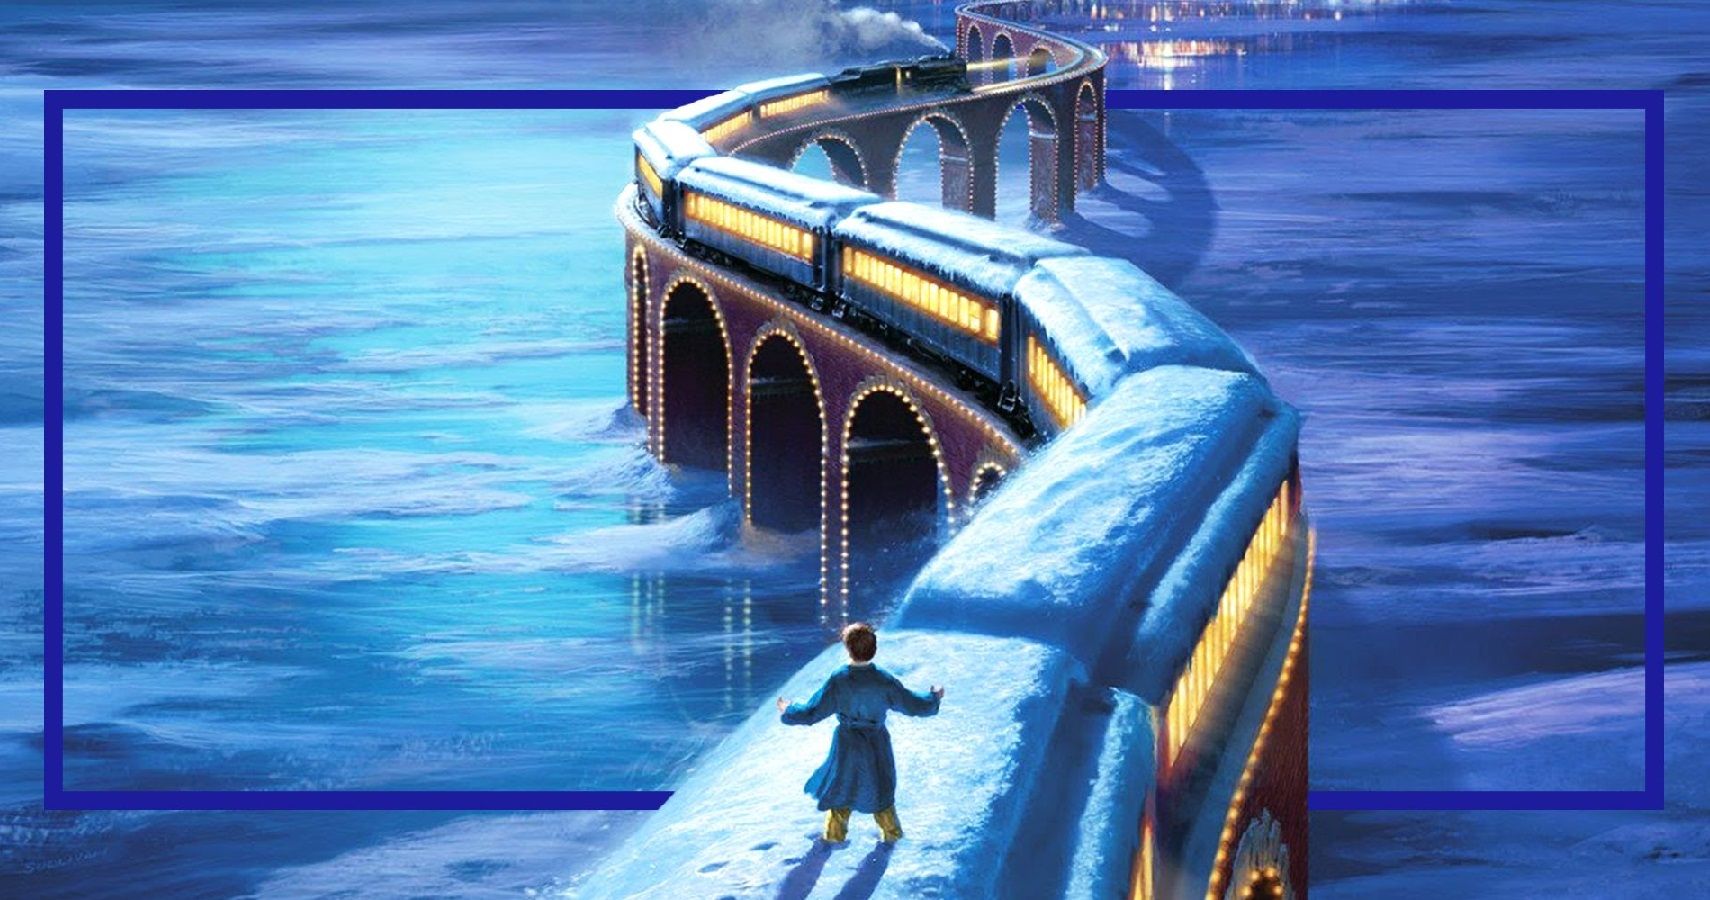 15 Hidden Details You Missed In The Polar Express